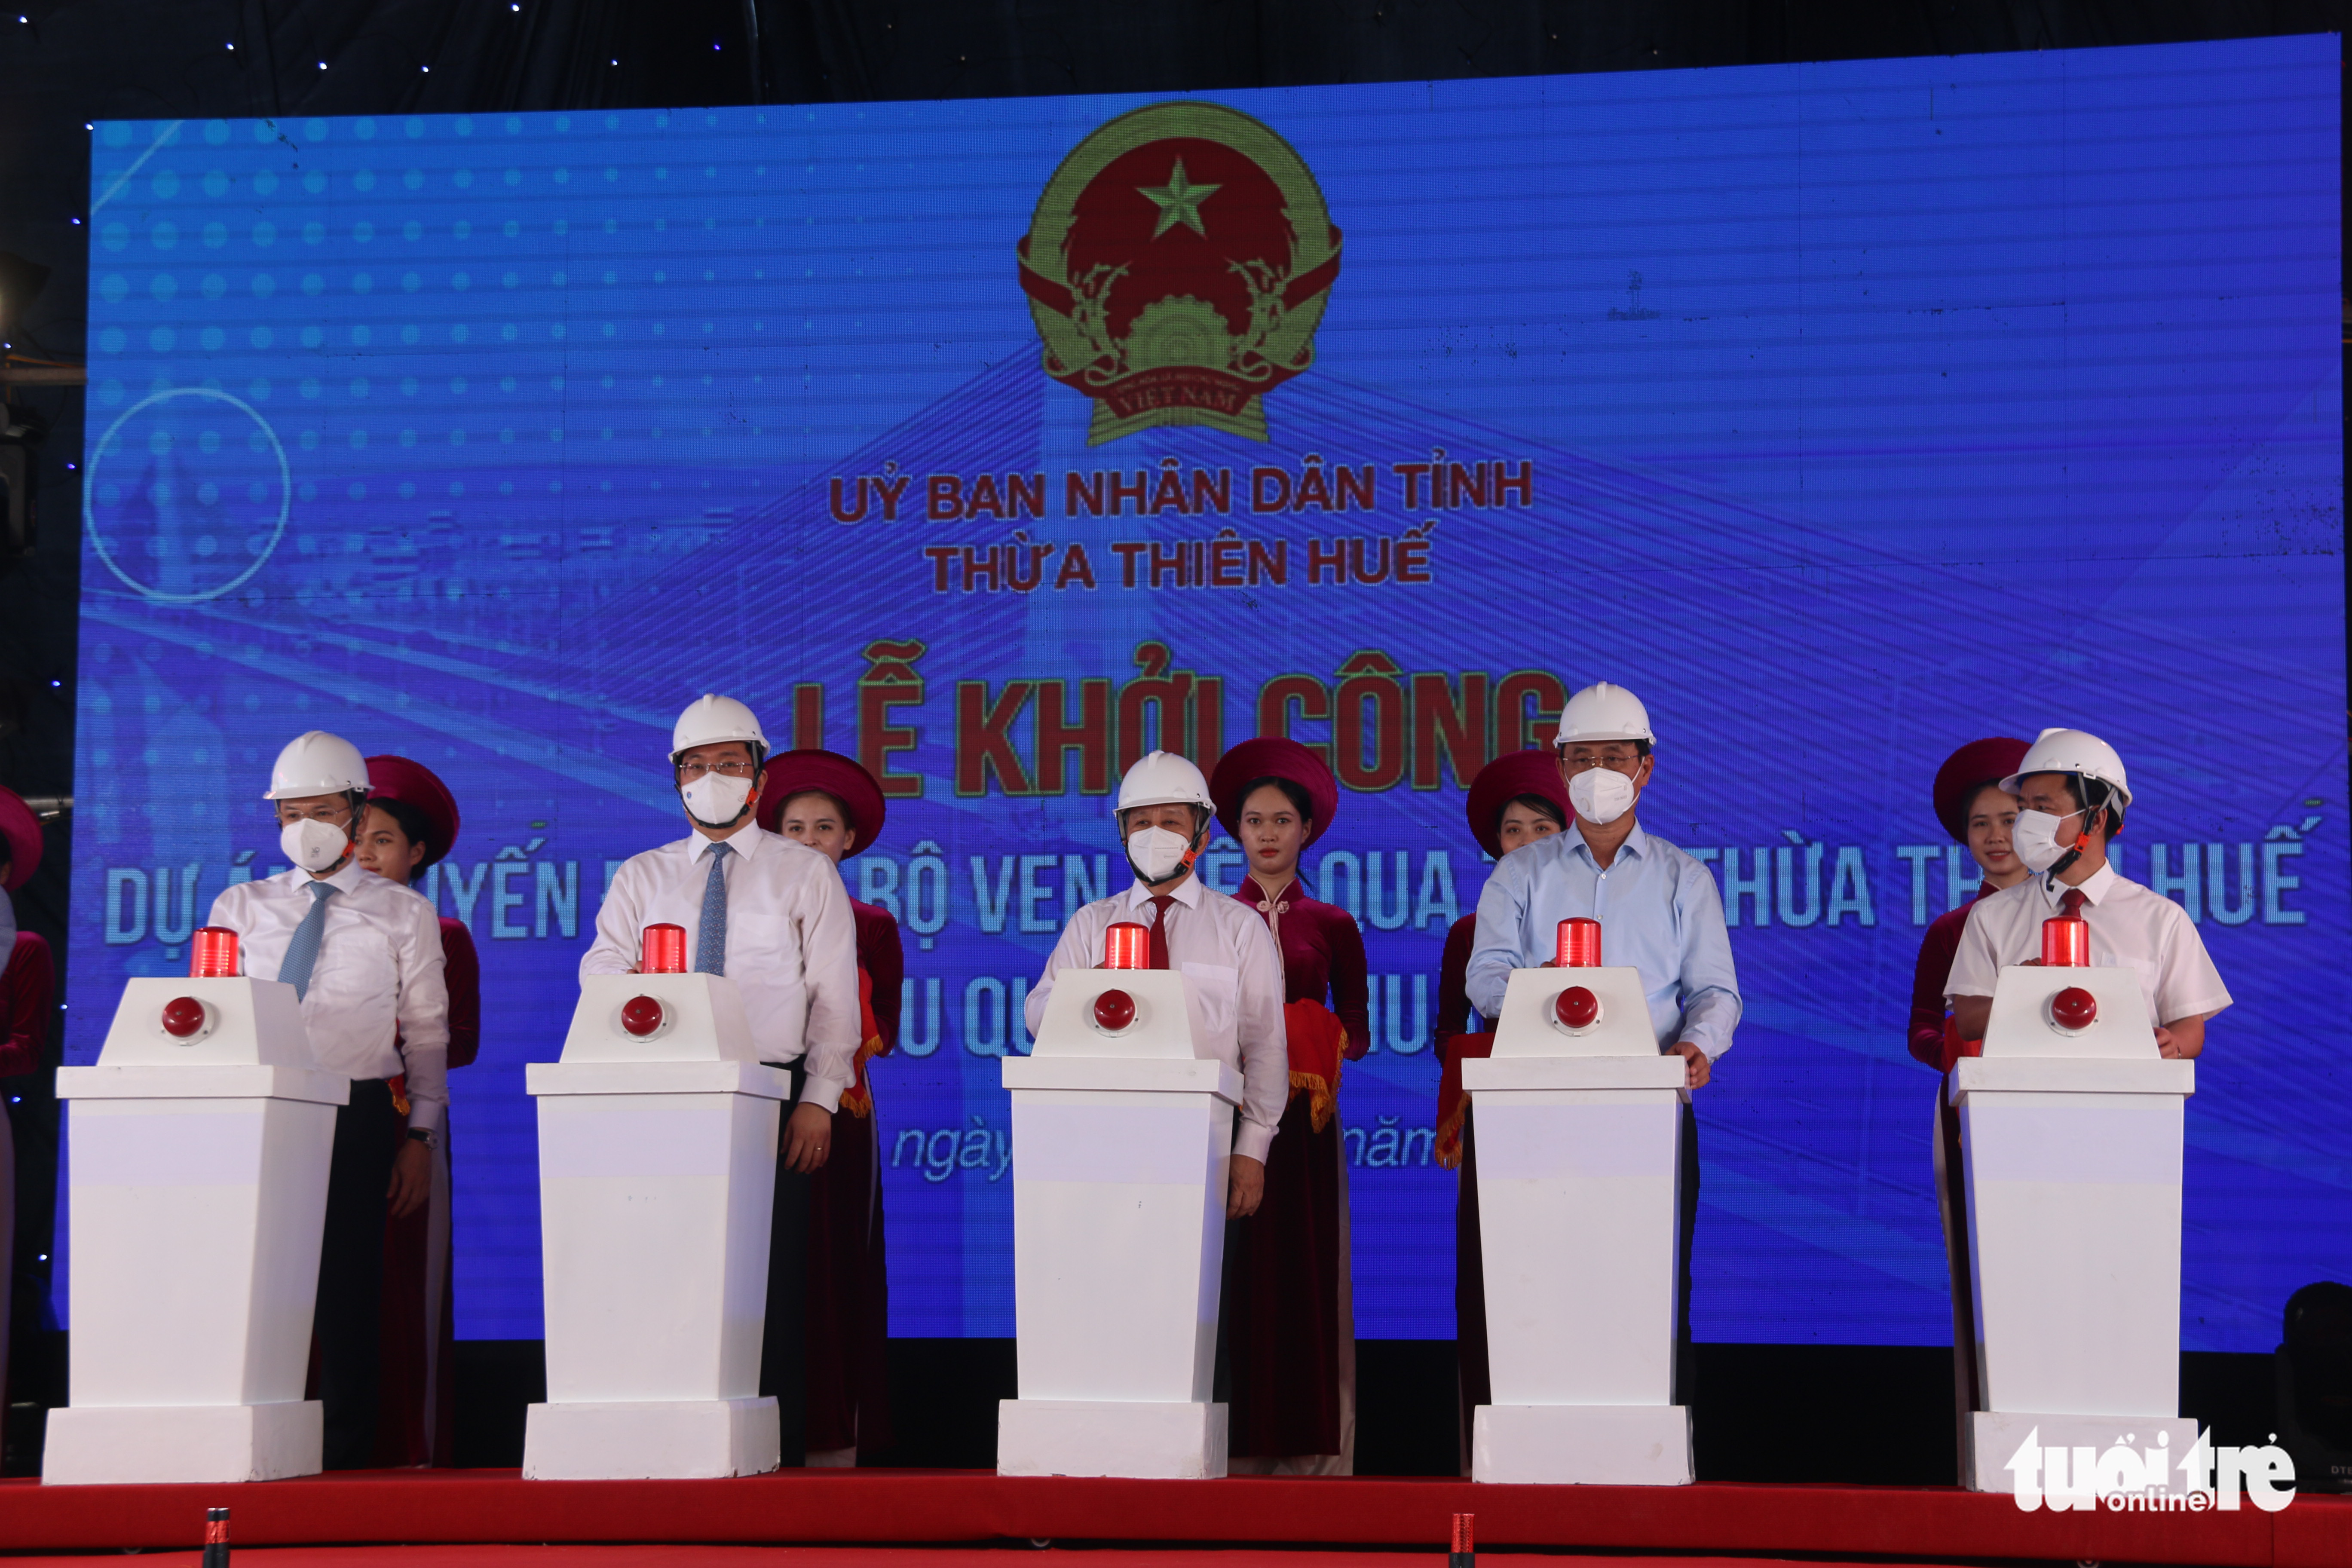 The groundbreaking of the project is organized in Thua Thien-Hue Province, Vietnam, March 26, 2022. Photo: Nhat Linh / Tuoi Tre